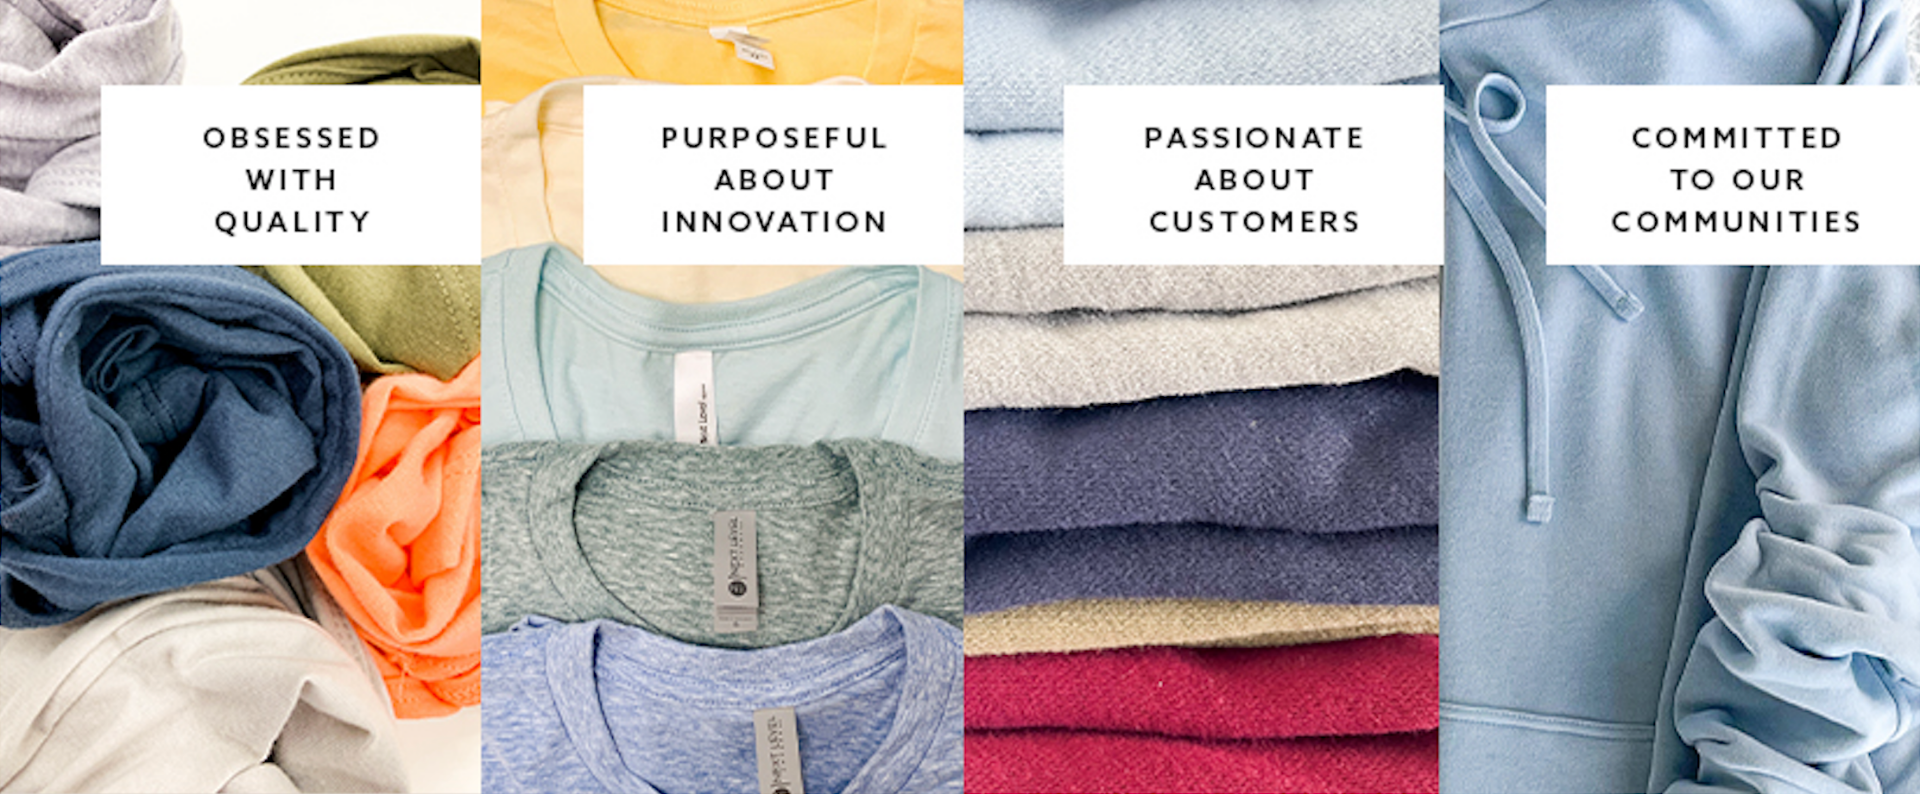 Our Mission: Make the best shirts on Earth. We are: Obsessed with quality, Purposeful about innovation, Passionate about customers, and Committed to our communities.